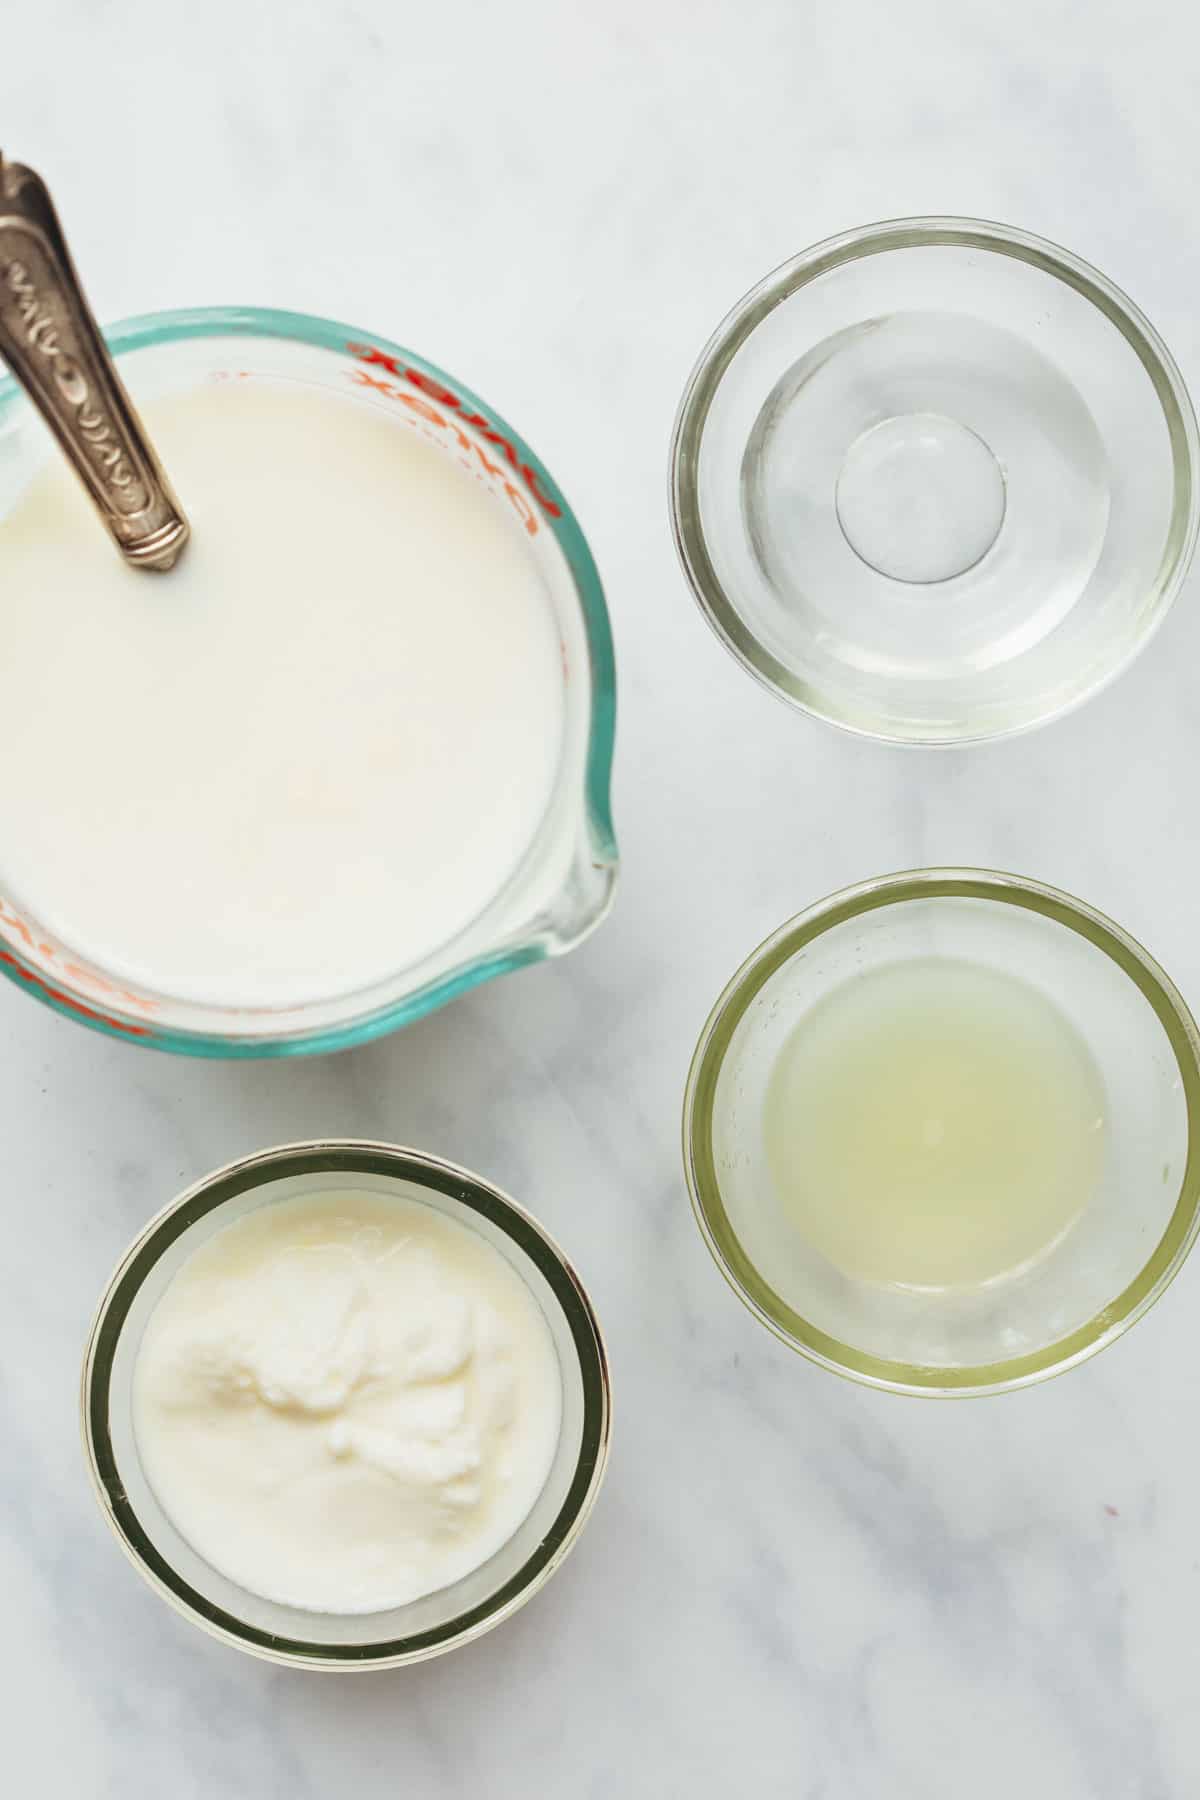 Milk, yogurt, vinegar and lemon juice - the ingredients that can be used to make buttermilk at home.